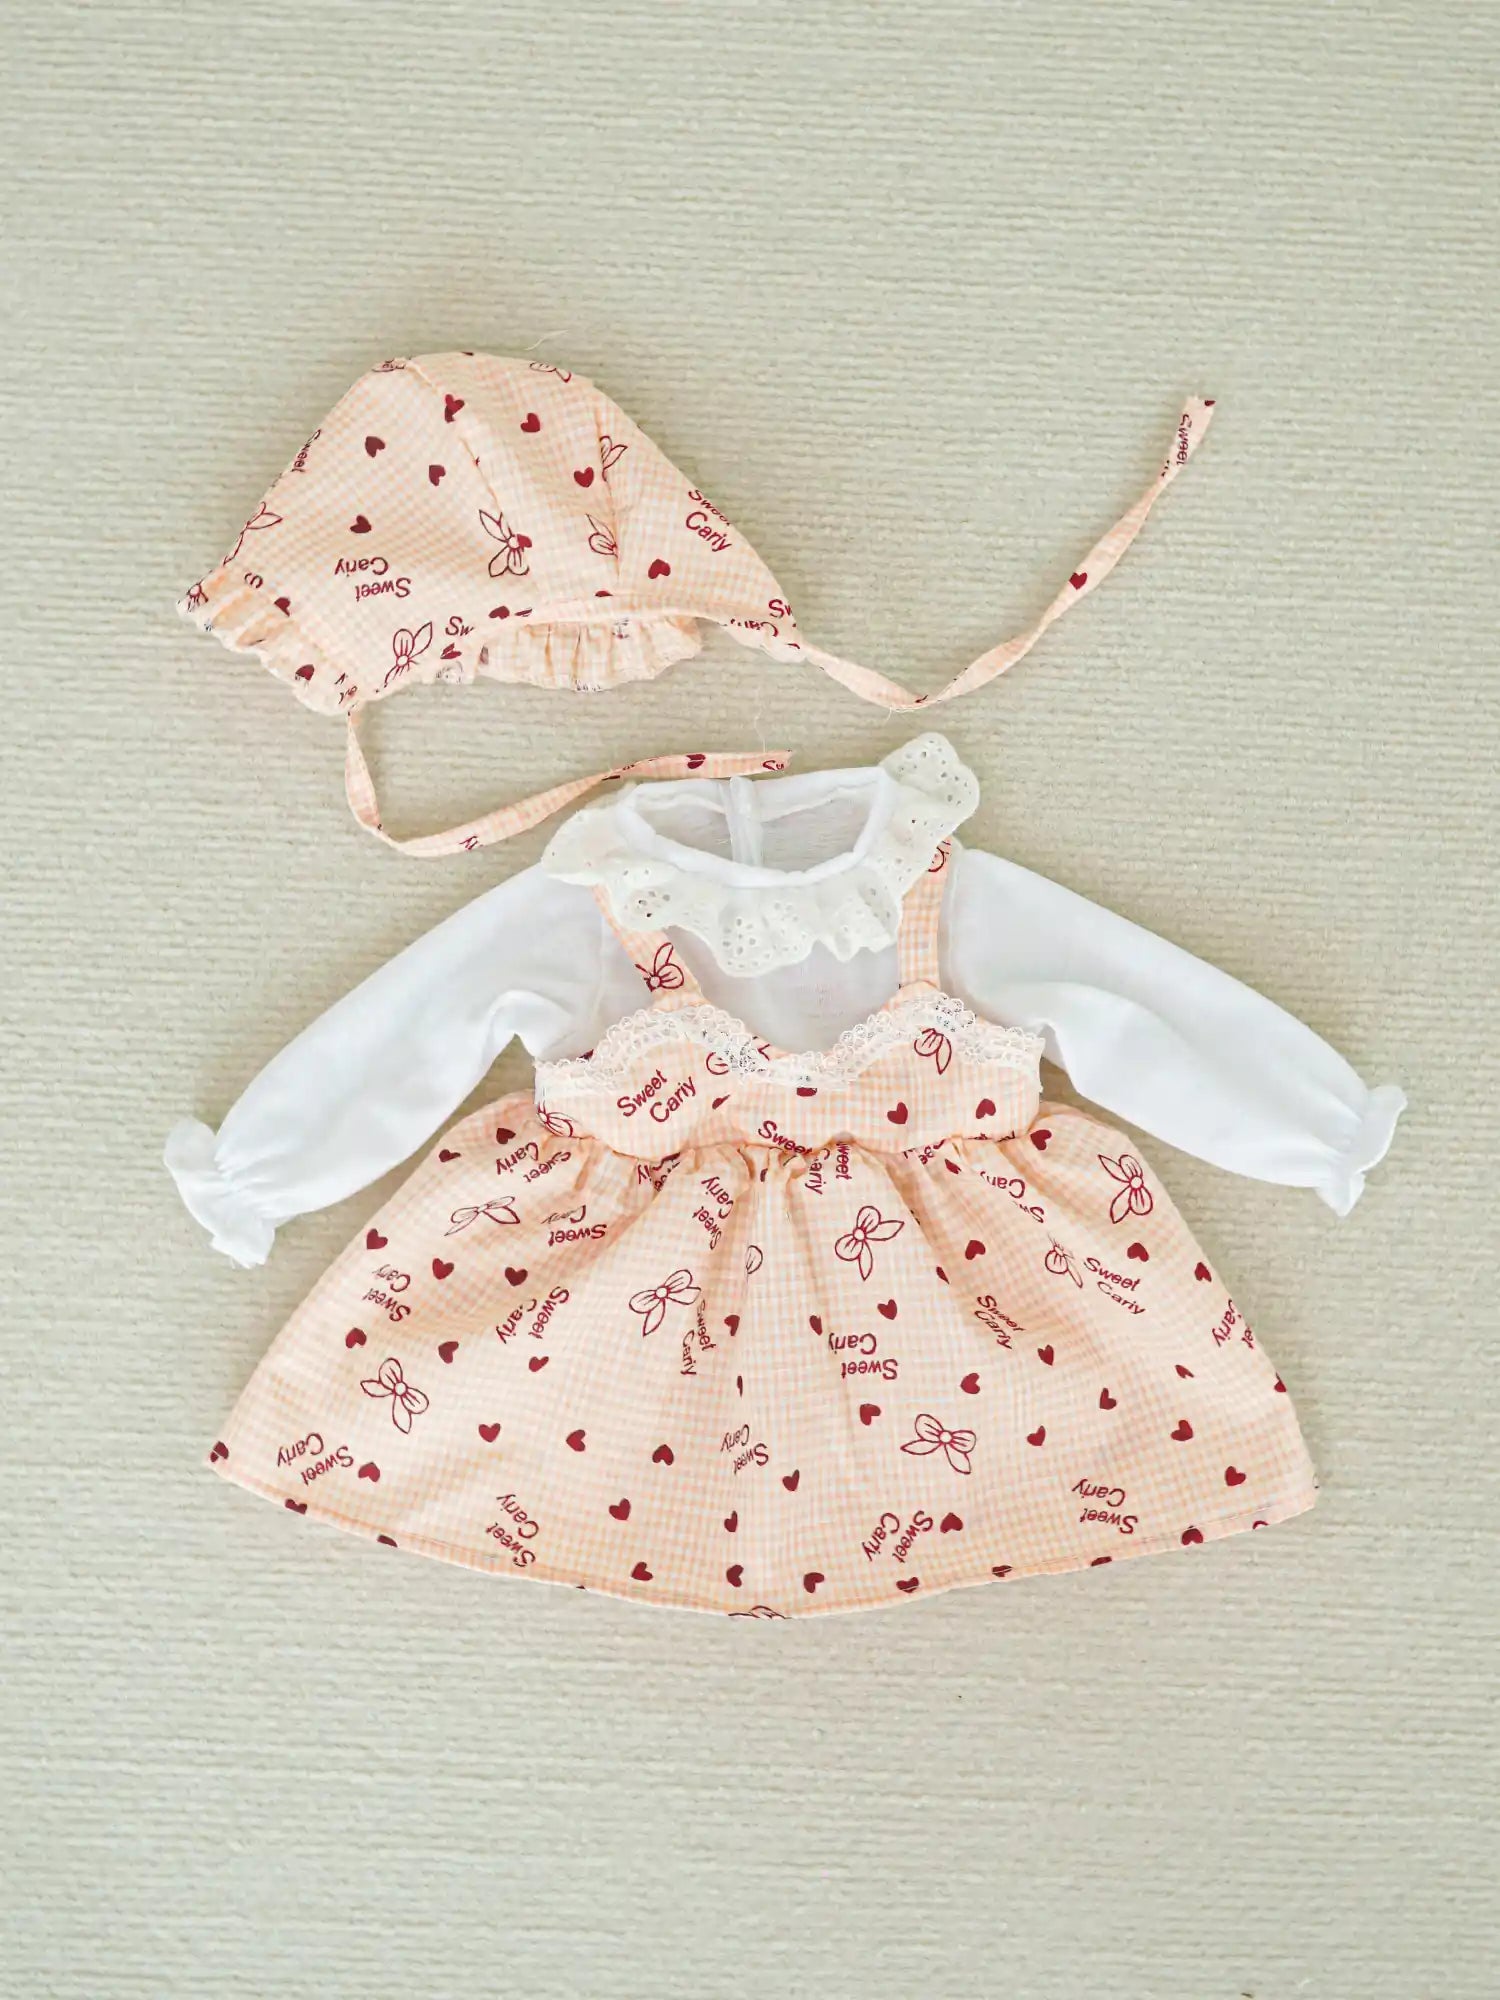 Baby outfit featuring a white blouse with lace details and a pink bonnet and skirt patterned with red hearts and bows.